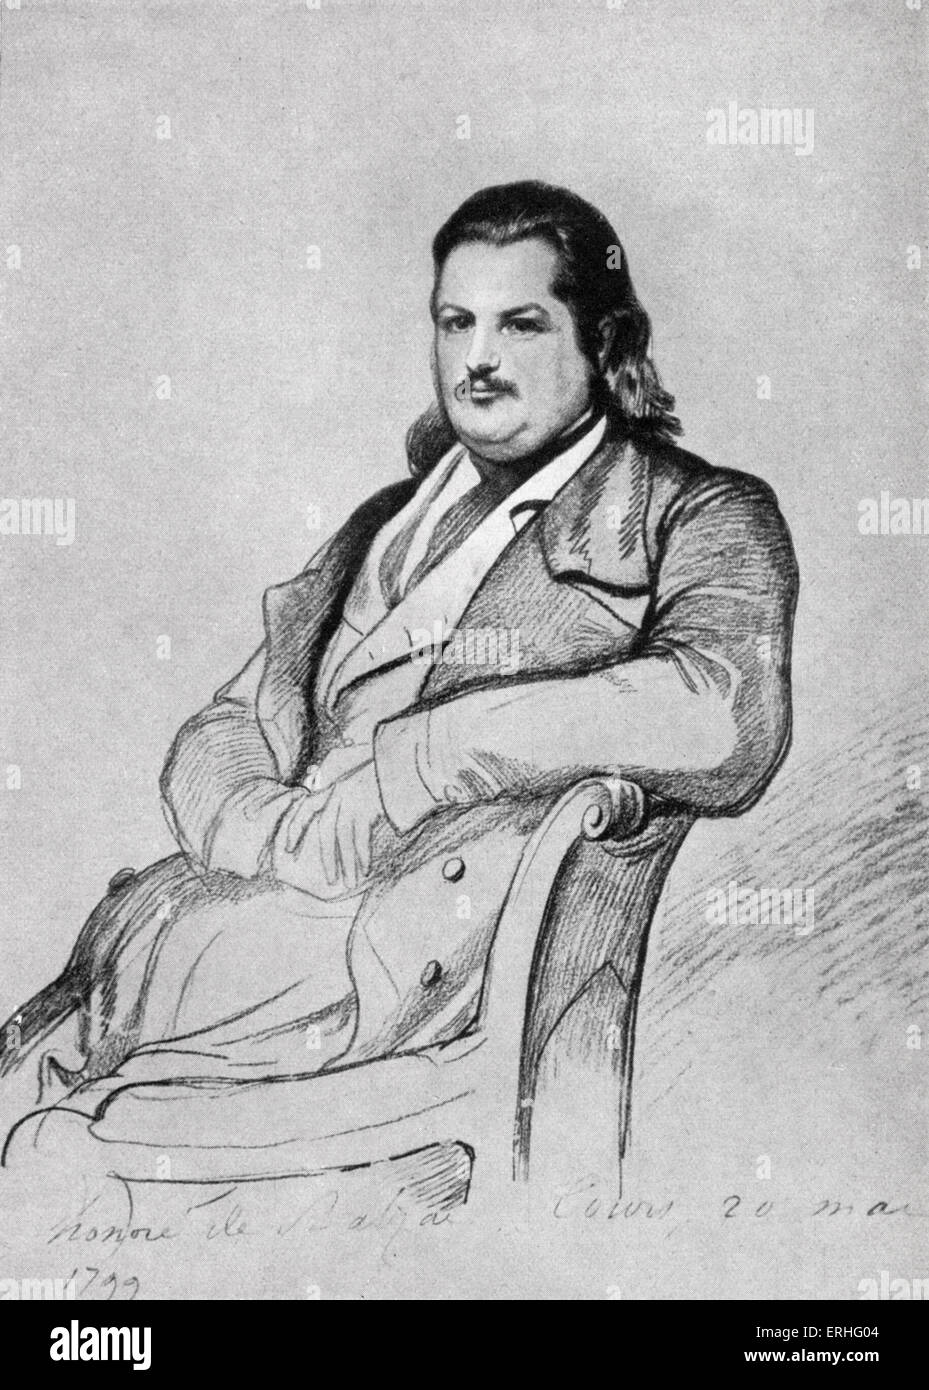 Honoré de Balzac, portrait drawing by Vogel von Vogelstein. French novelist and poet. 20 May  1799 - 19 August 1850. Stock Photo